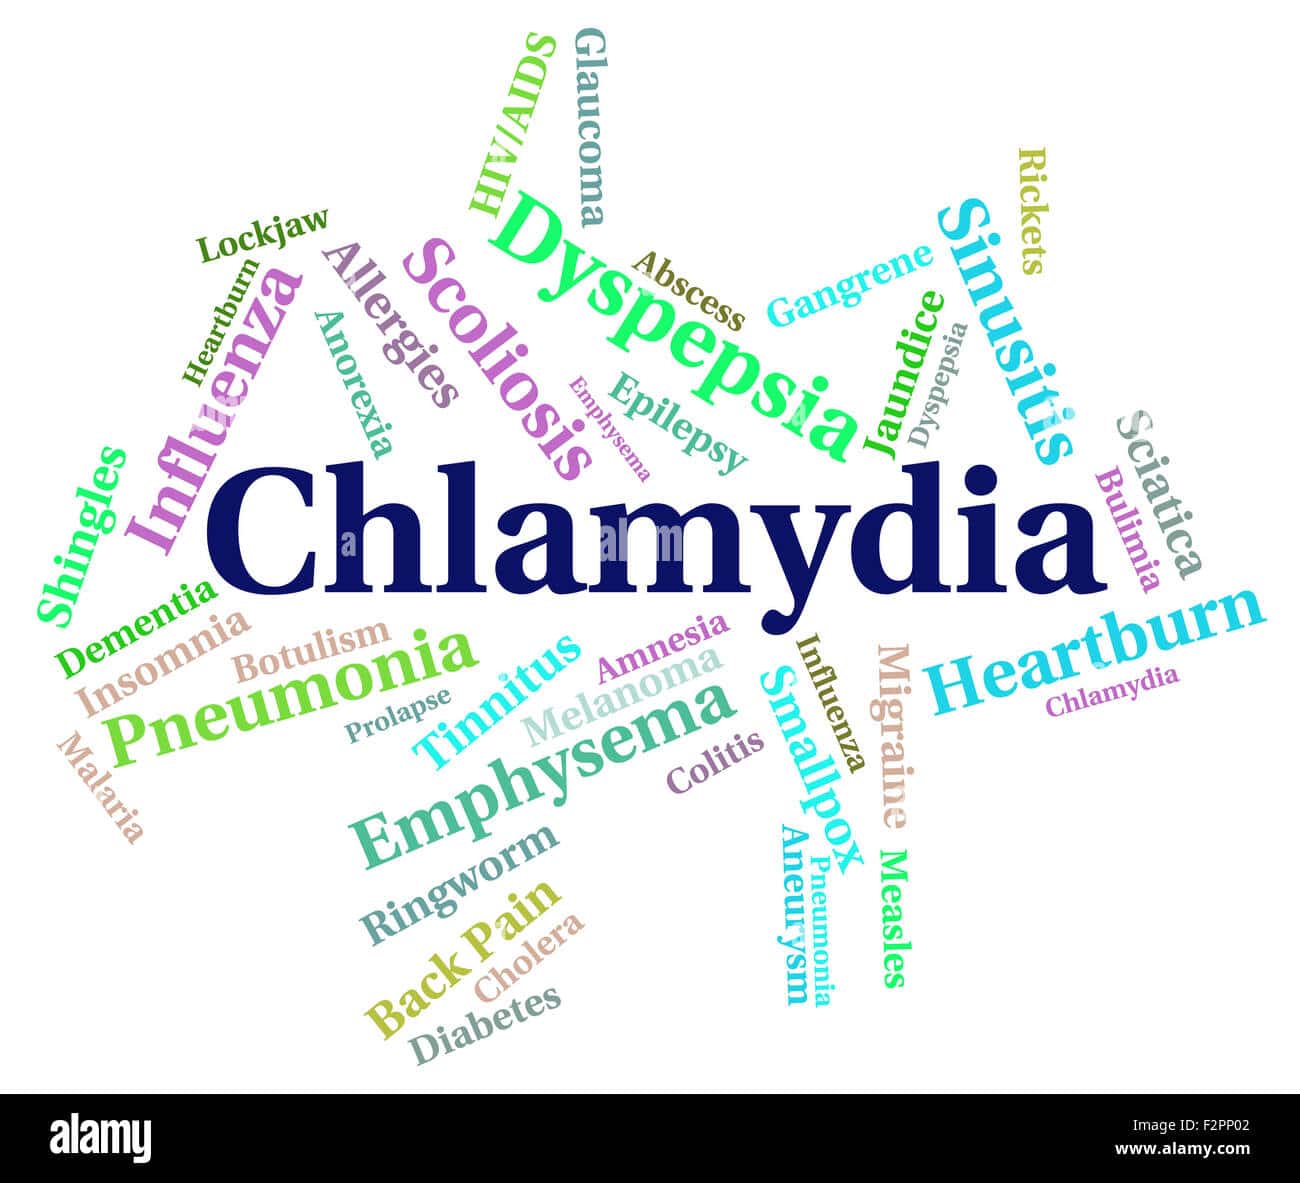 Chlamydia Word Meaning Sexually Transmitted Disease And Poor Health ...